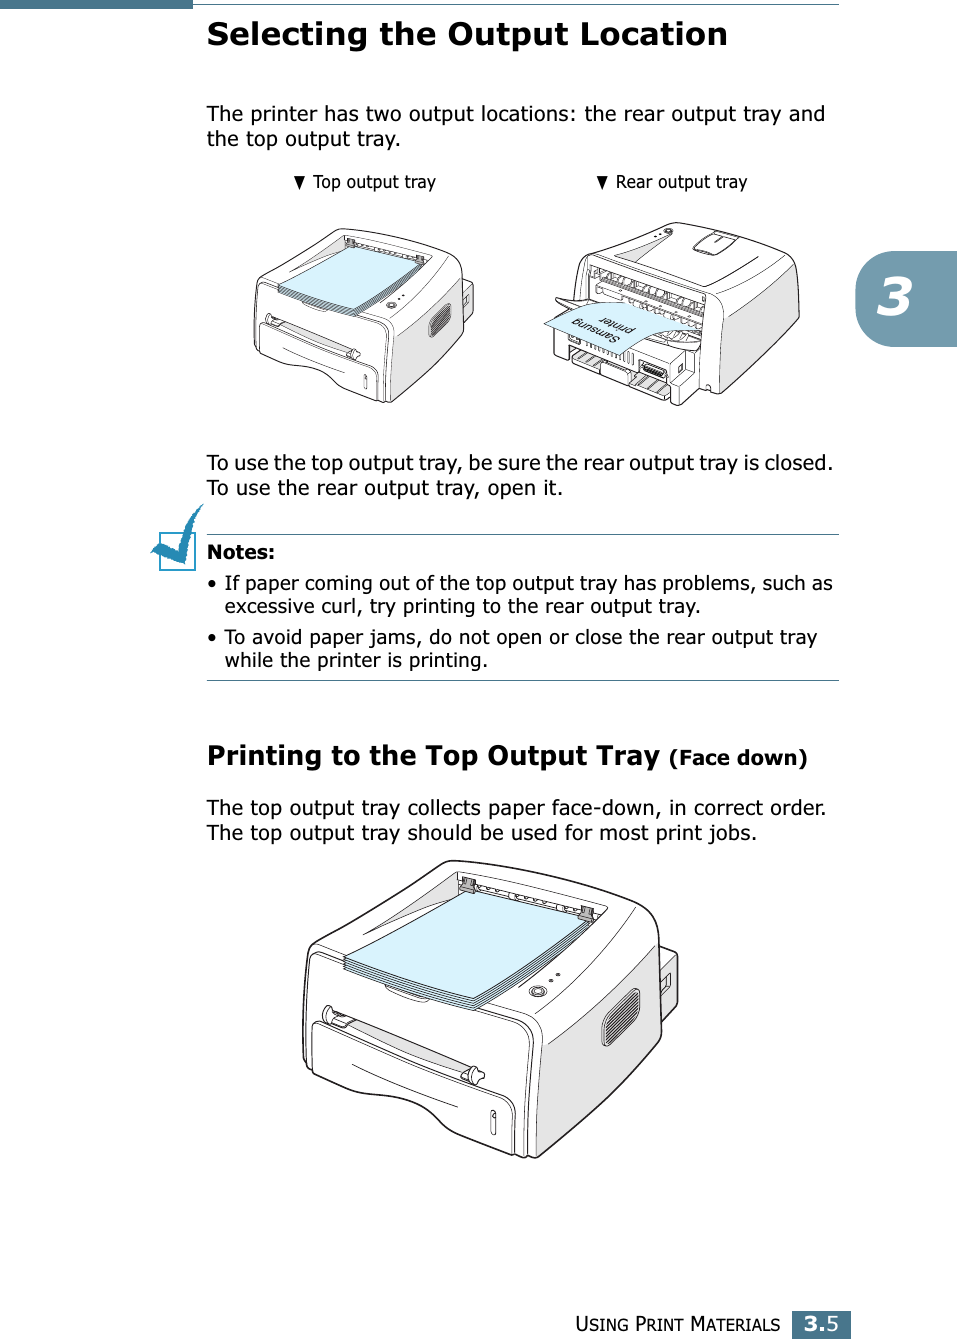 USING PRINT MATERIALS3.53Selecting the Output LocationThe printer has two output locations: the rear output tray and the top output tray. To use the top output tray, be sure the rear output tray is closed. To use the rear output tray, open it.Notes:• If paper coming out of the top output tray has problems, such as excessive curl, try printing to the rear output tray.• To avoid paper jams, do not open or close the rear output tray while the printer is printing.Printing to the Top Output Tray (Face down)The top output tray collects paper face-down, in correct order. The top output tray should be used for most print jobs.❷ Top output tray ❷ Rear output tray